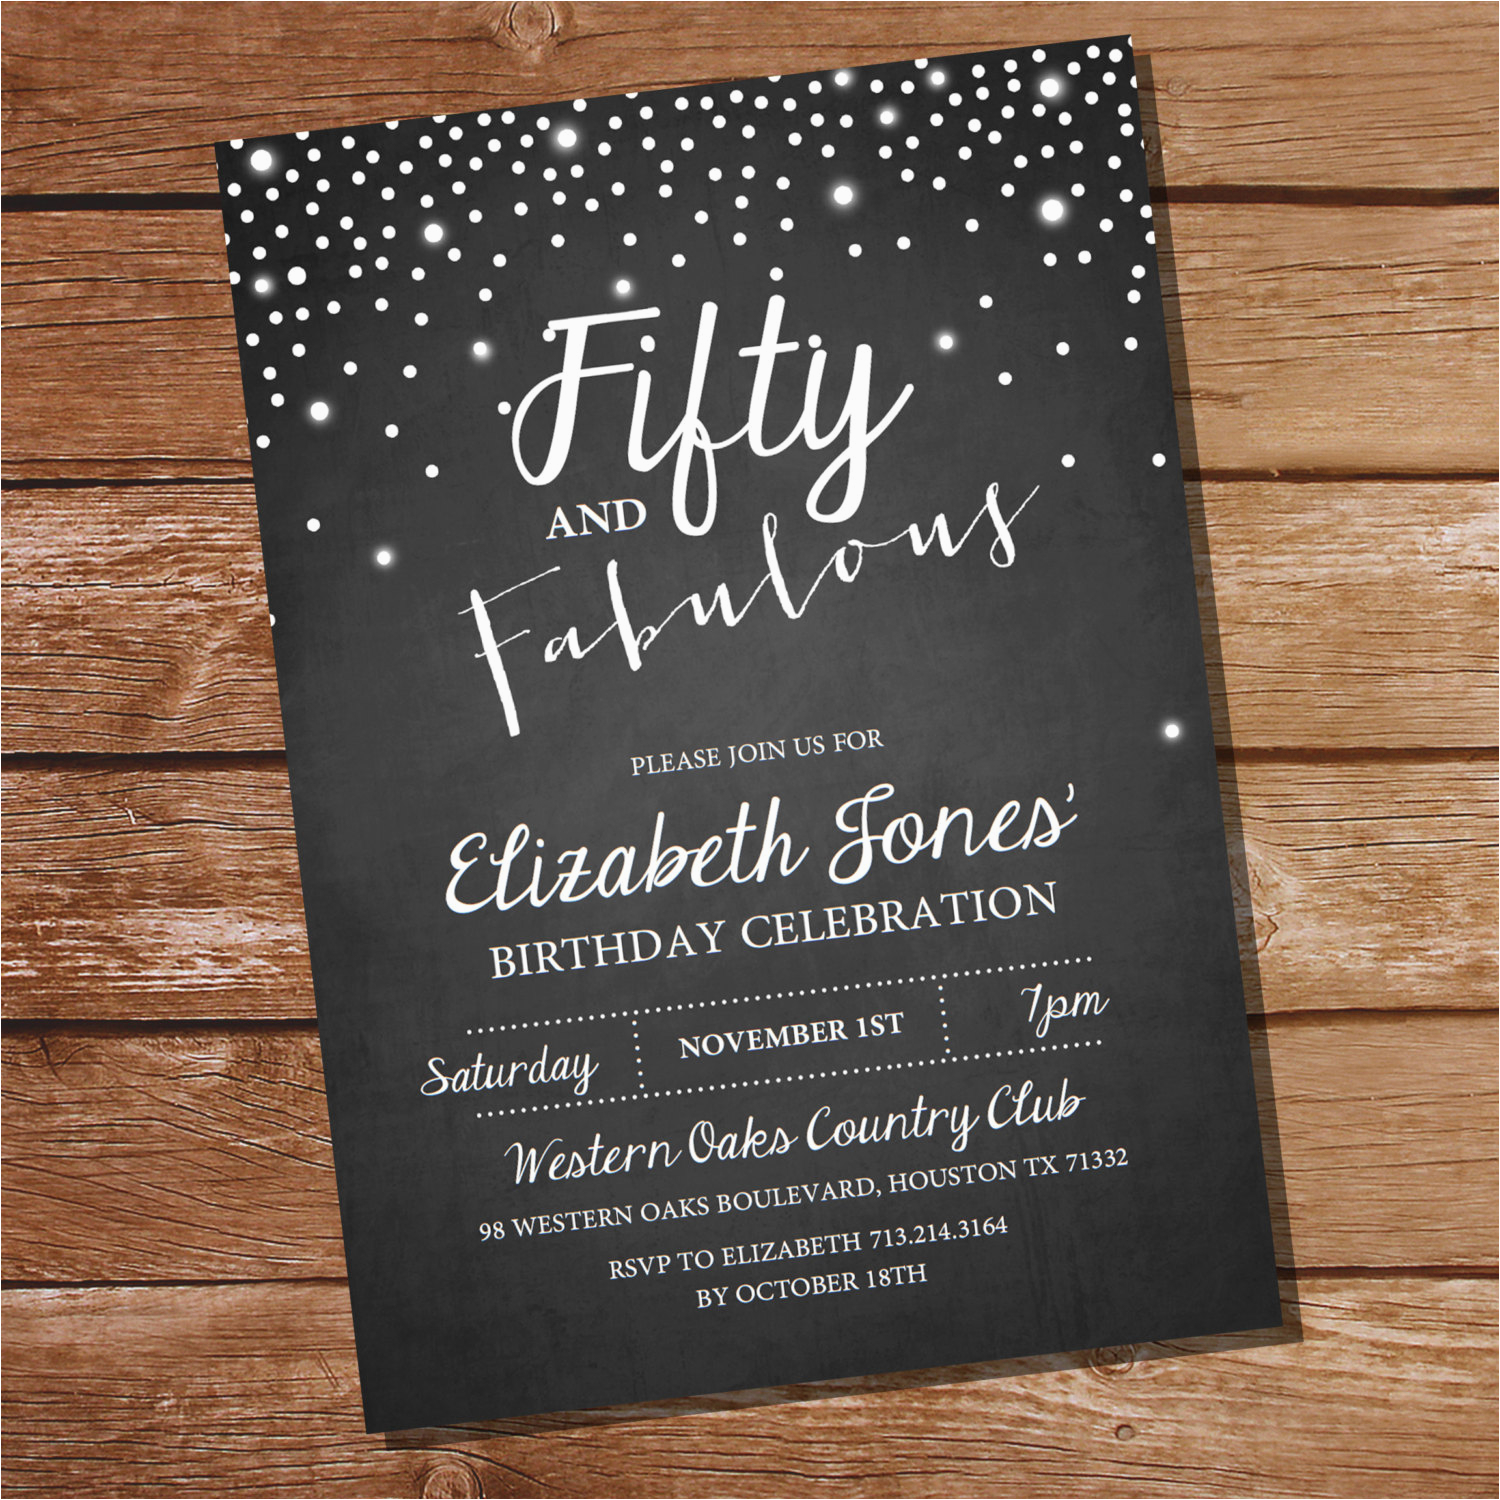 50 and Fabulous Birthday Invitations Fifty and Fabulous Chalkboard Birthday Invitation 40th 50th